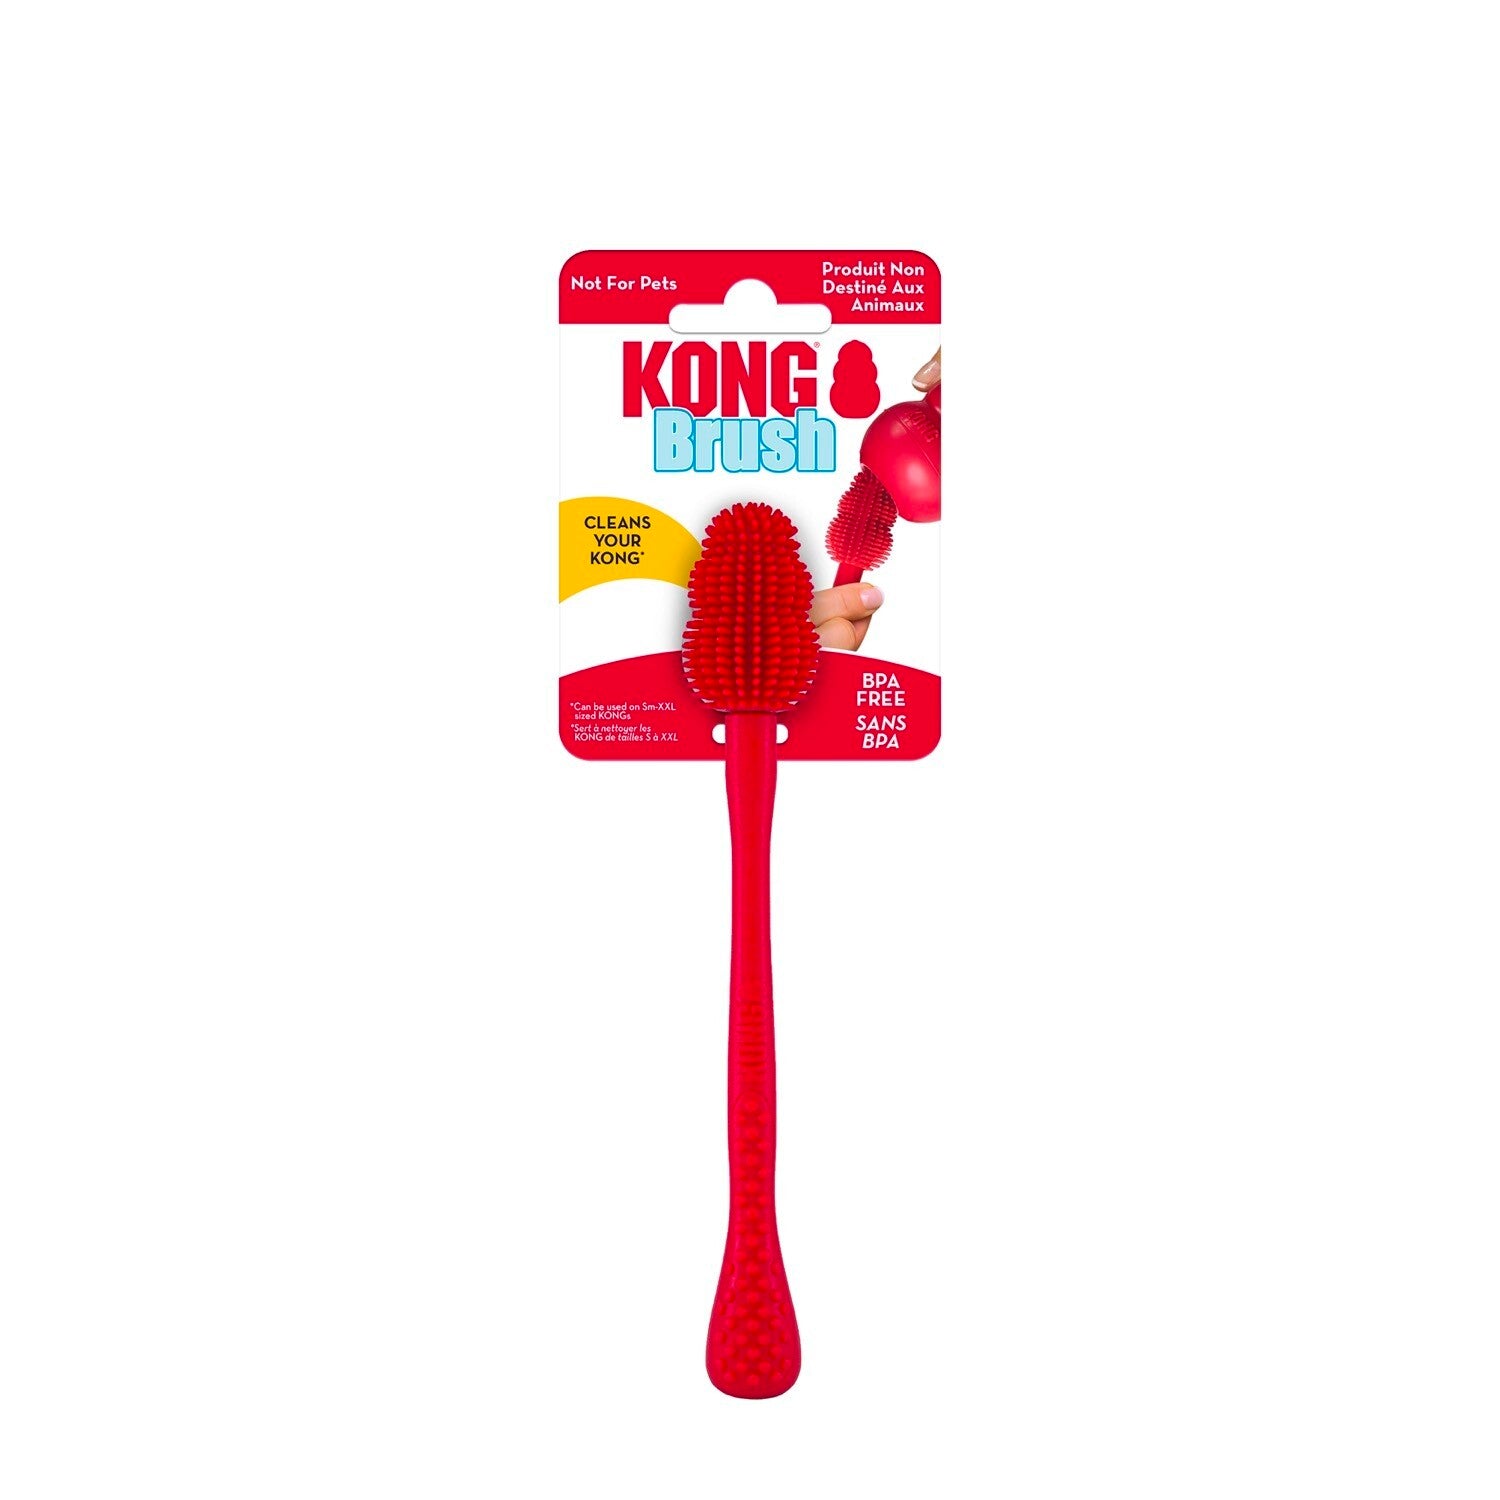 KONG - Classic Dog Toy (Red)